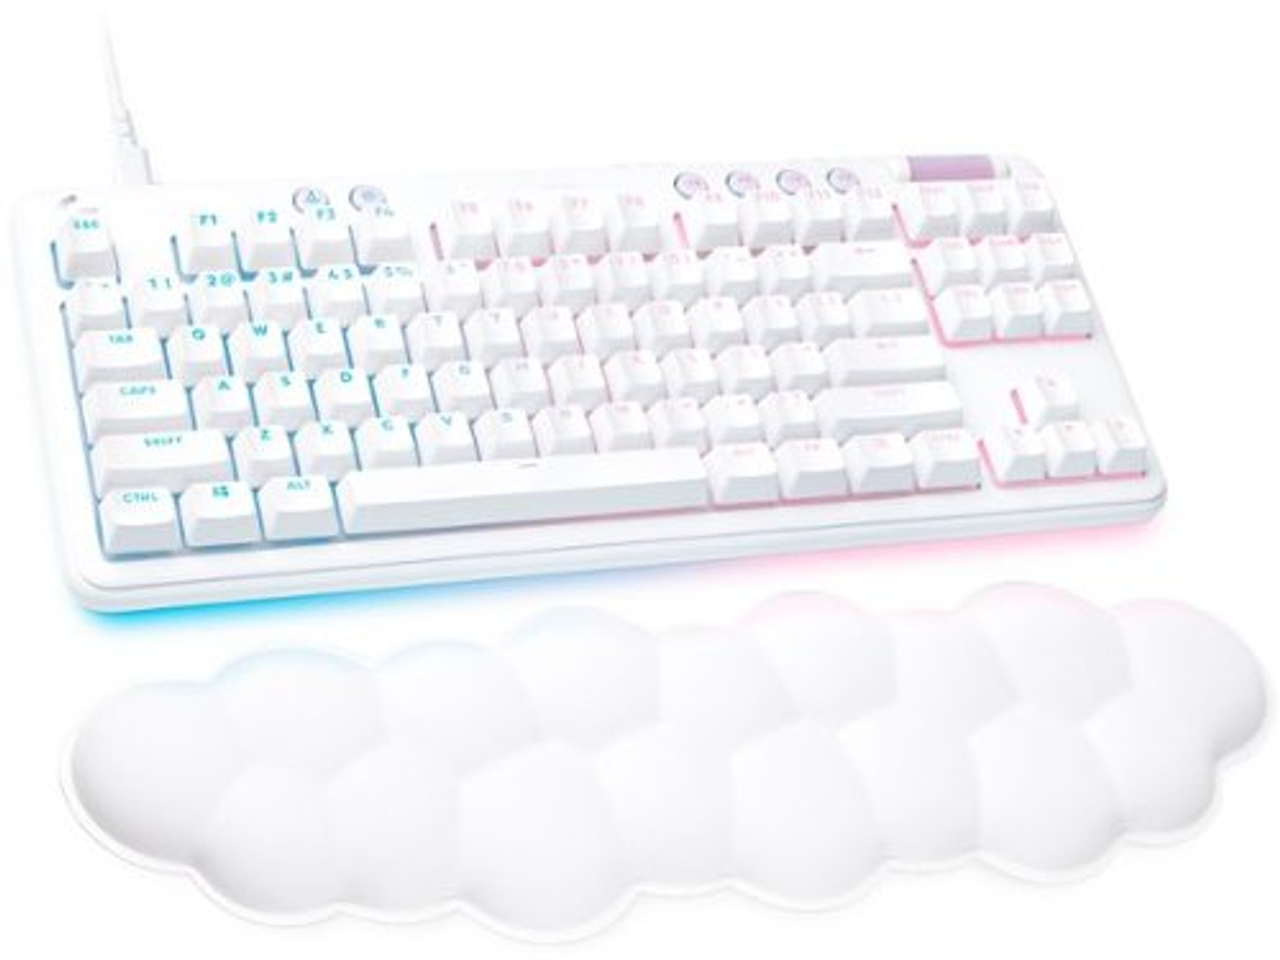 Logitech - G713 TKL Wired Mechanical Linear Switch Gaming Keyboard for PC/Mac with Palm Rest Included - White Mist